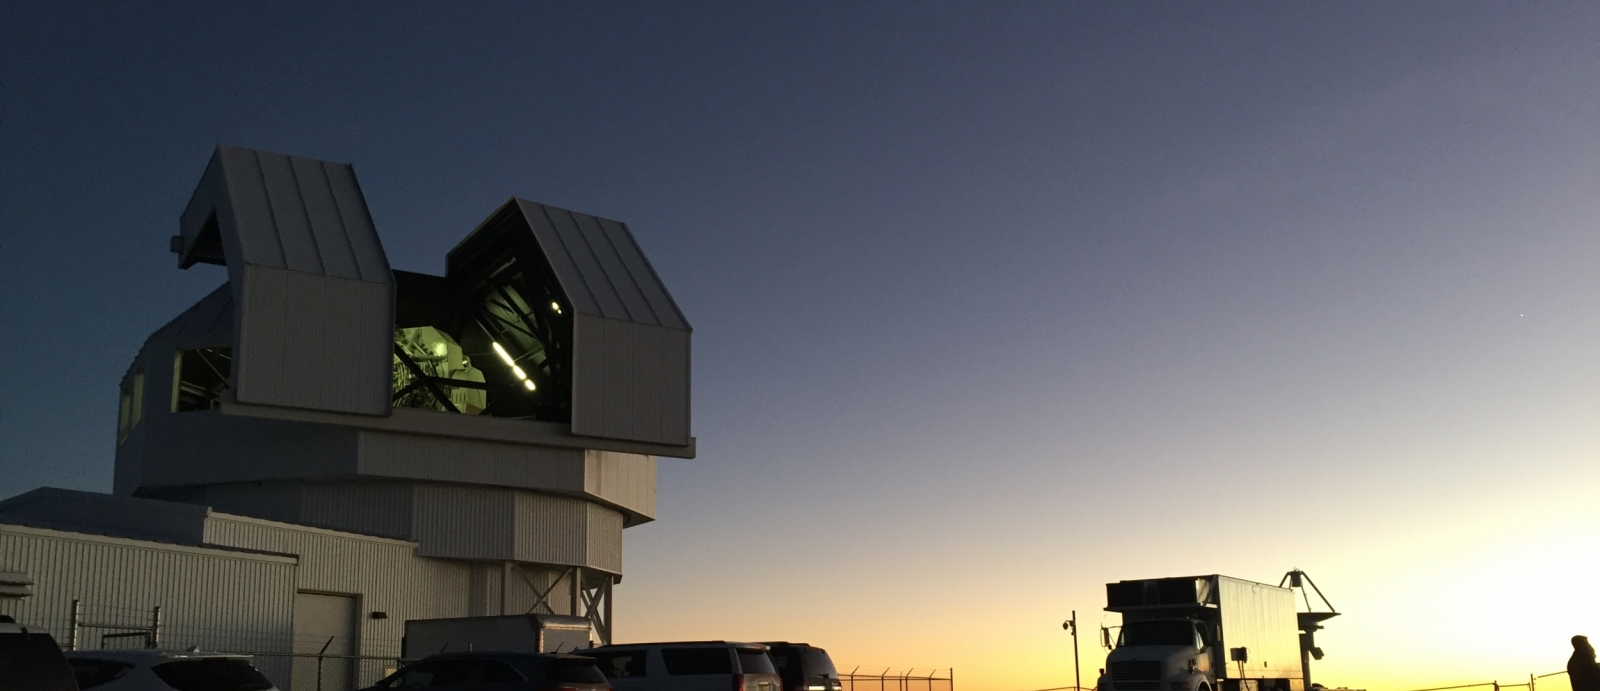 LINEAR The Space Surveillance Telescope was located at North Oscura Peak on the White Sands Missile Range in New Mexico until 2017 and is currently being relocated to Australia.